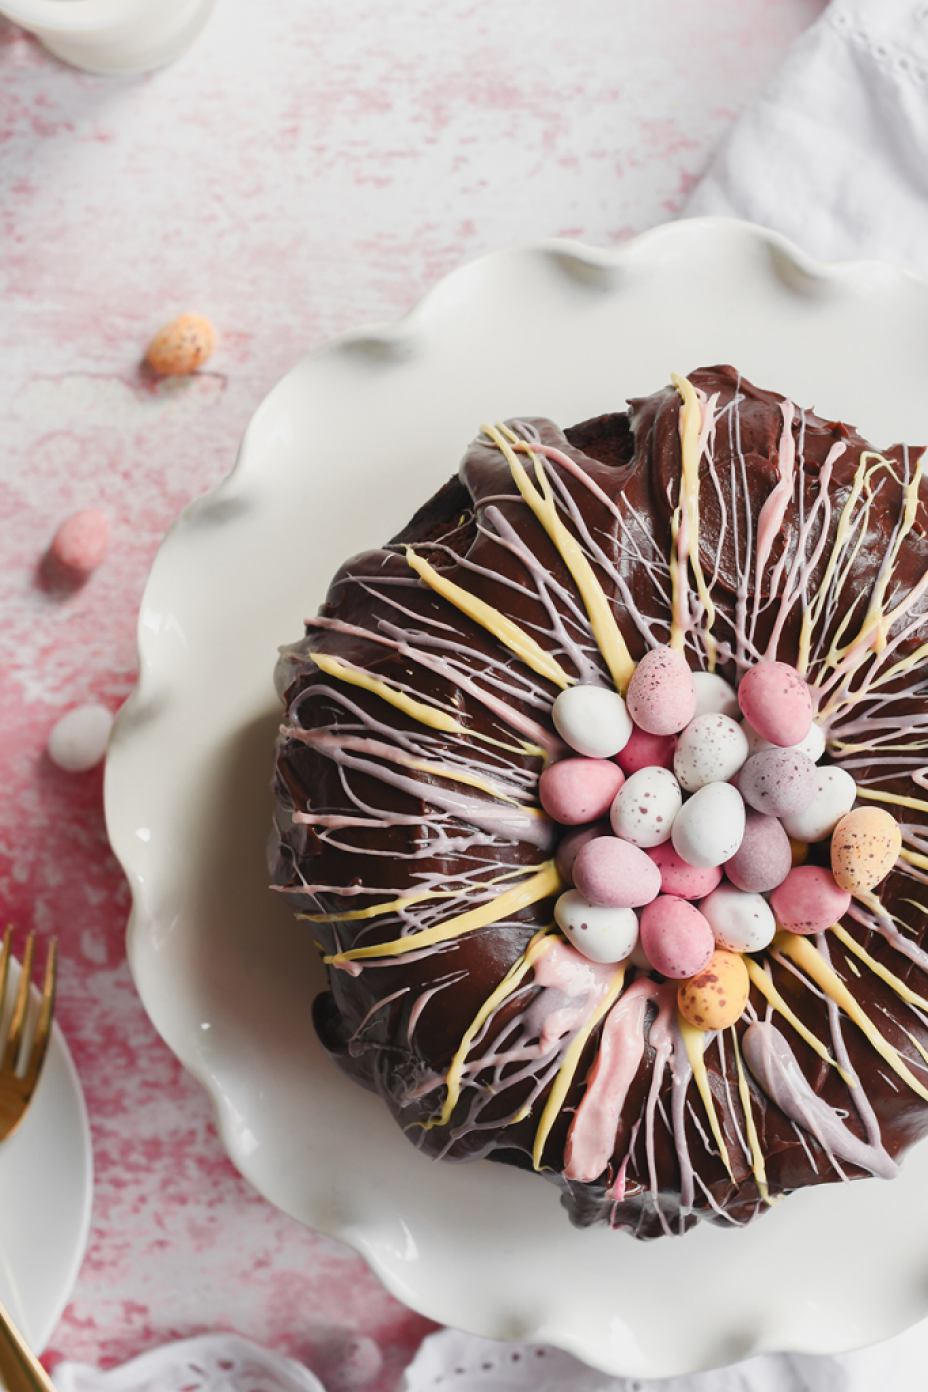 Mini eggs Easter cake. A simple chocolate cake showstopper, topped with luscious chocolate icing and tons of mini eggs